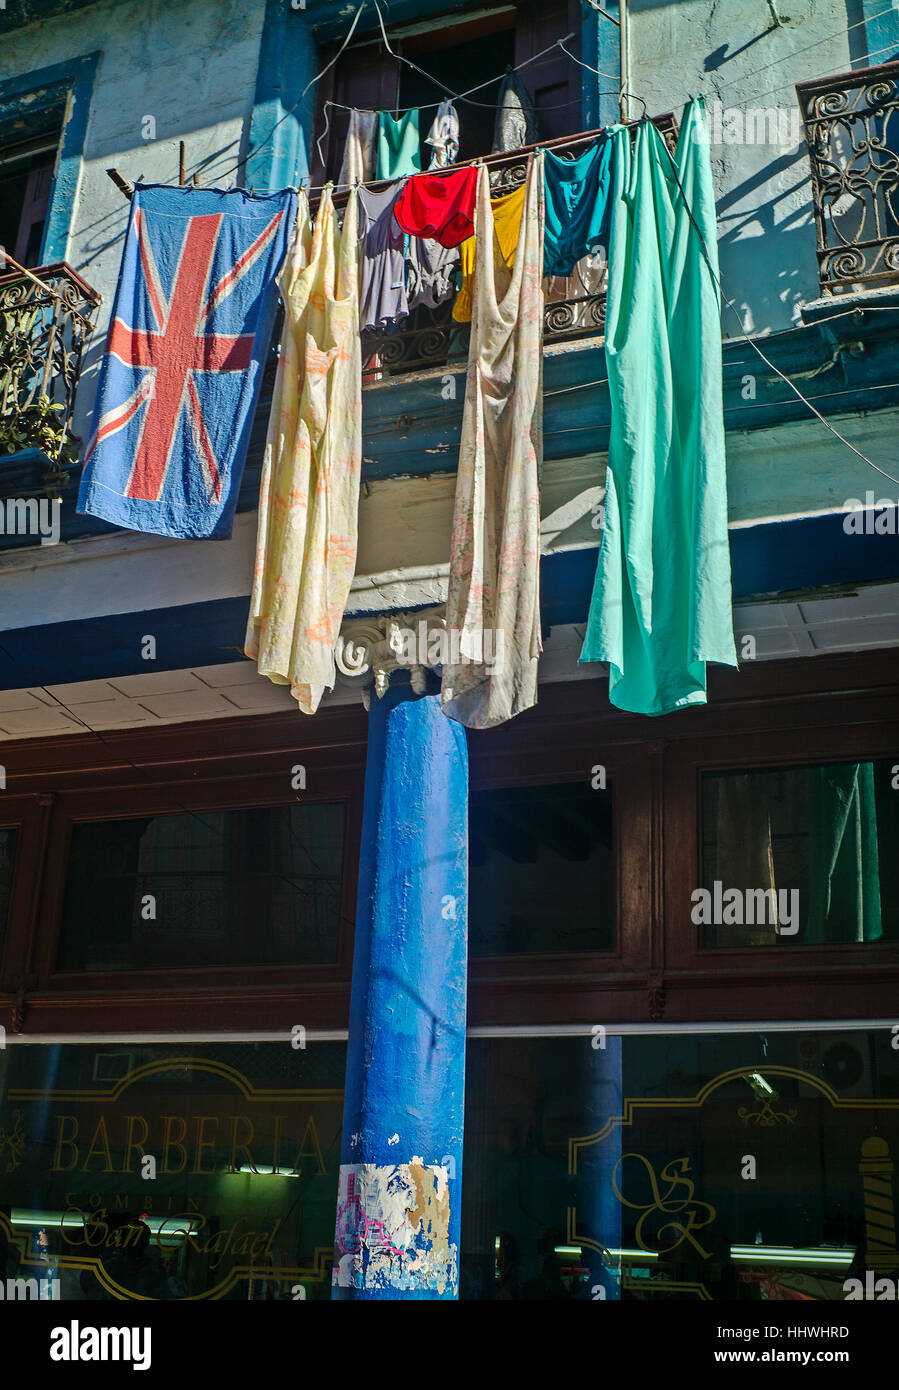 Clothes drying on line above central Havana shop bright blue pillar Stock Photo